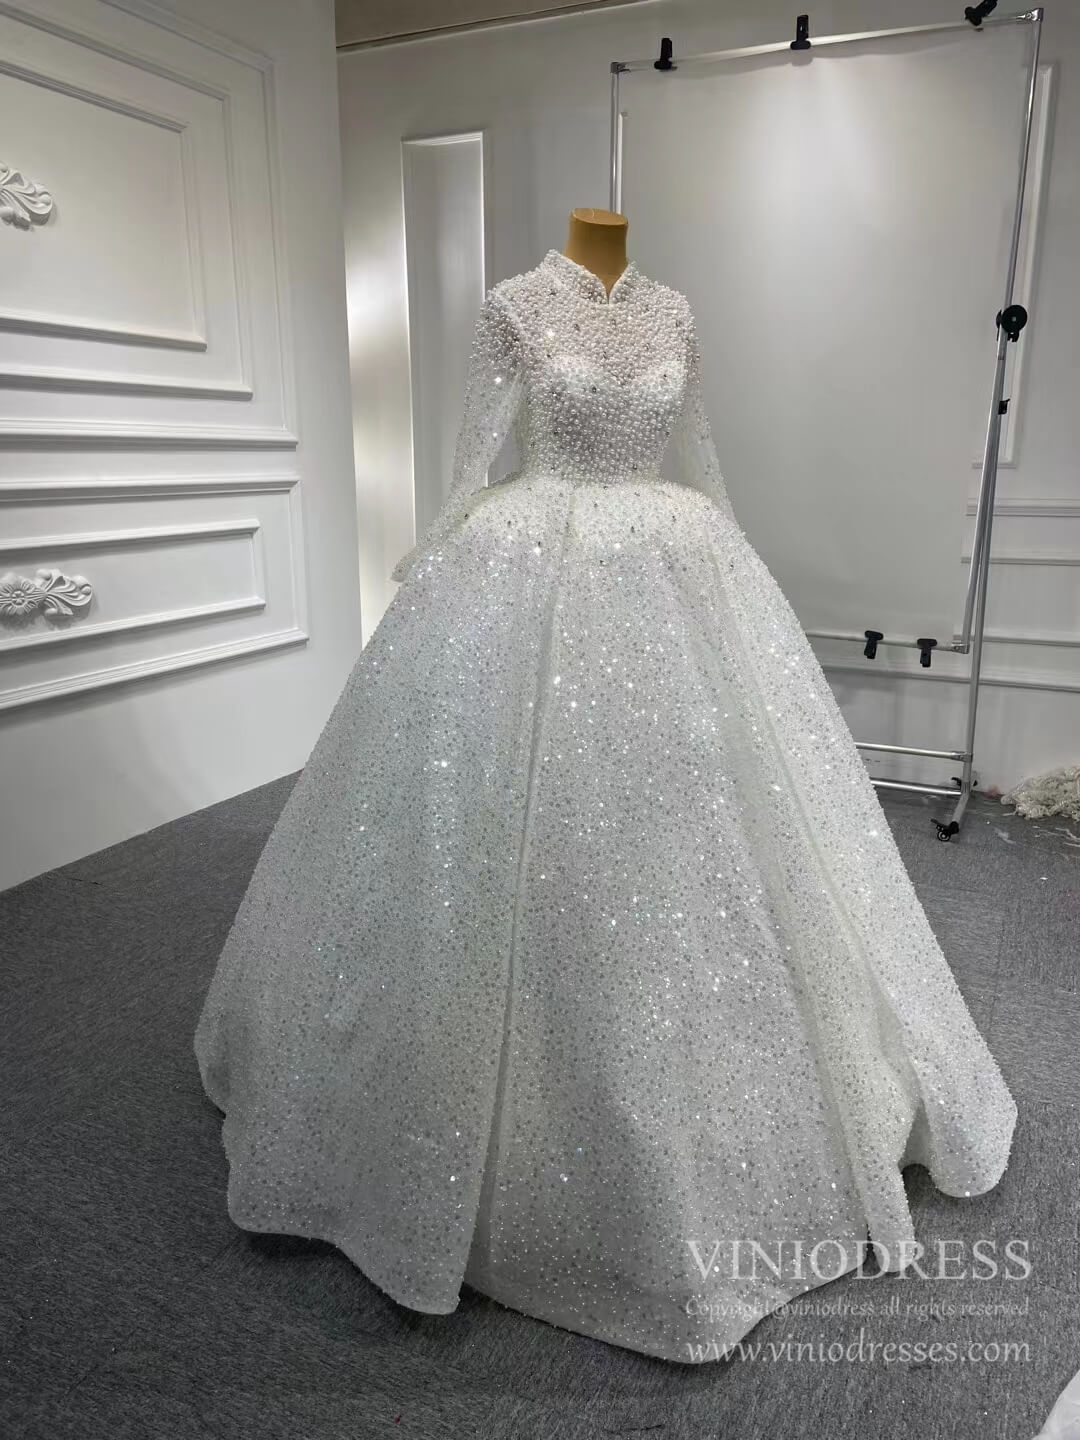 Modest High Neck Pearl Wedding Dresses with Sleeves 67265 VINIODRESS-wedding dresses-Viniodress-Viniodress